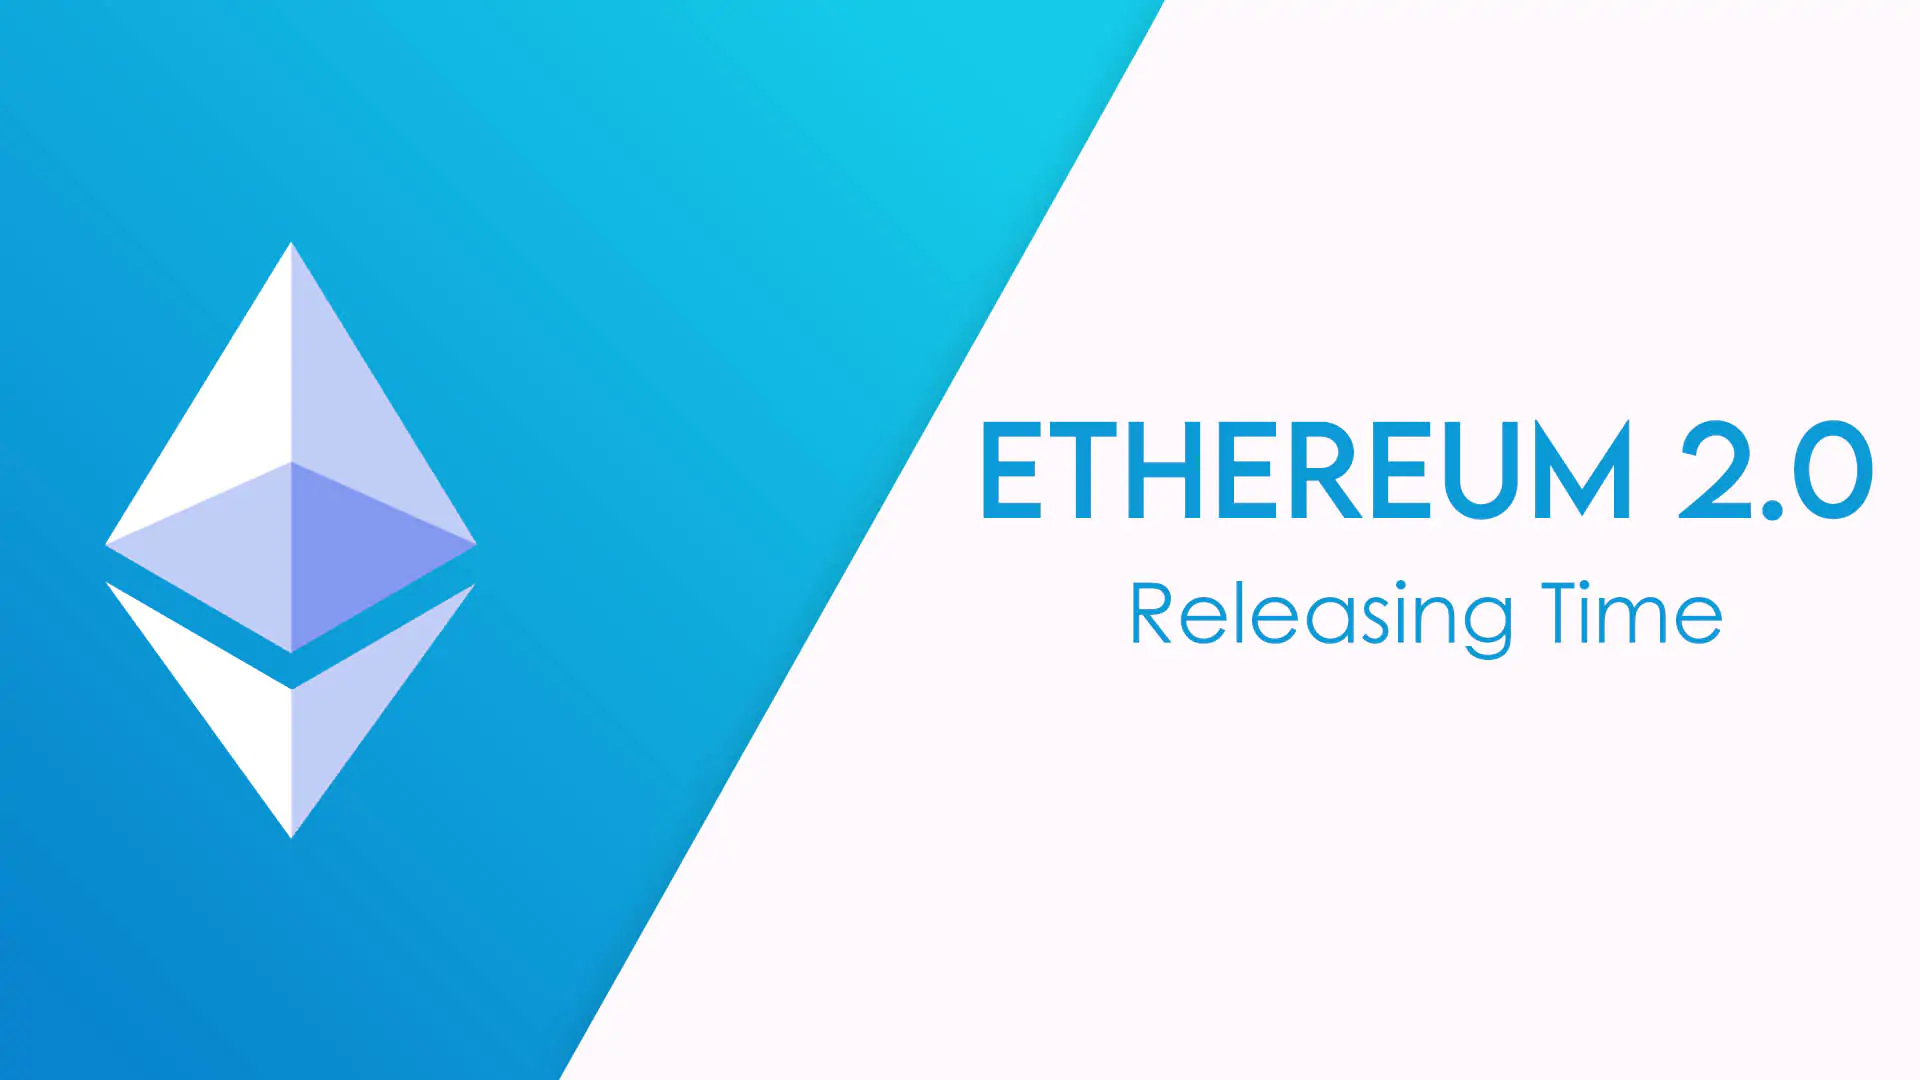 When is Ethereum 2.0 Releasing Time?